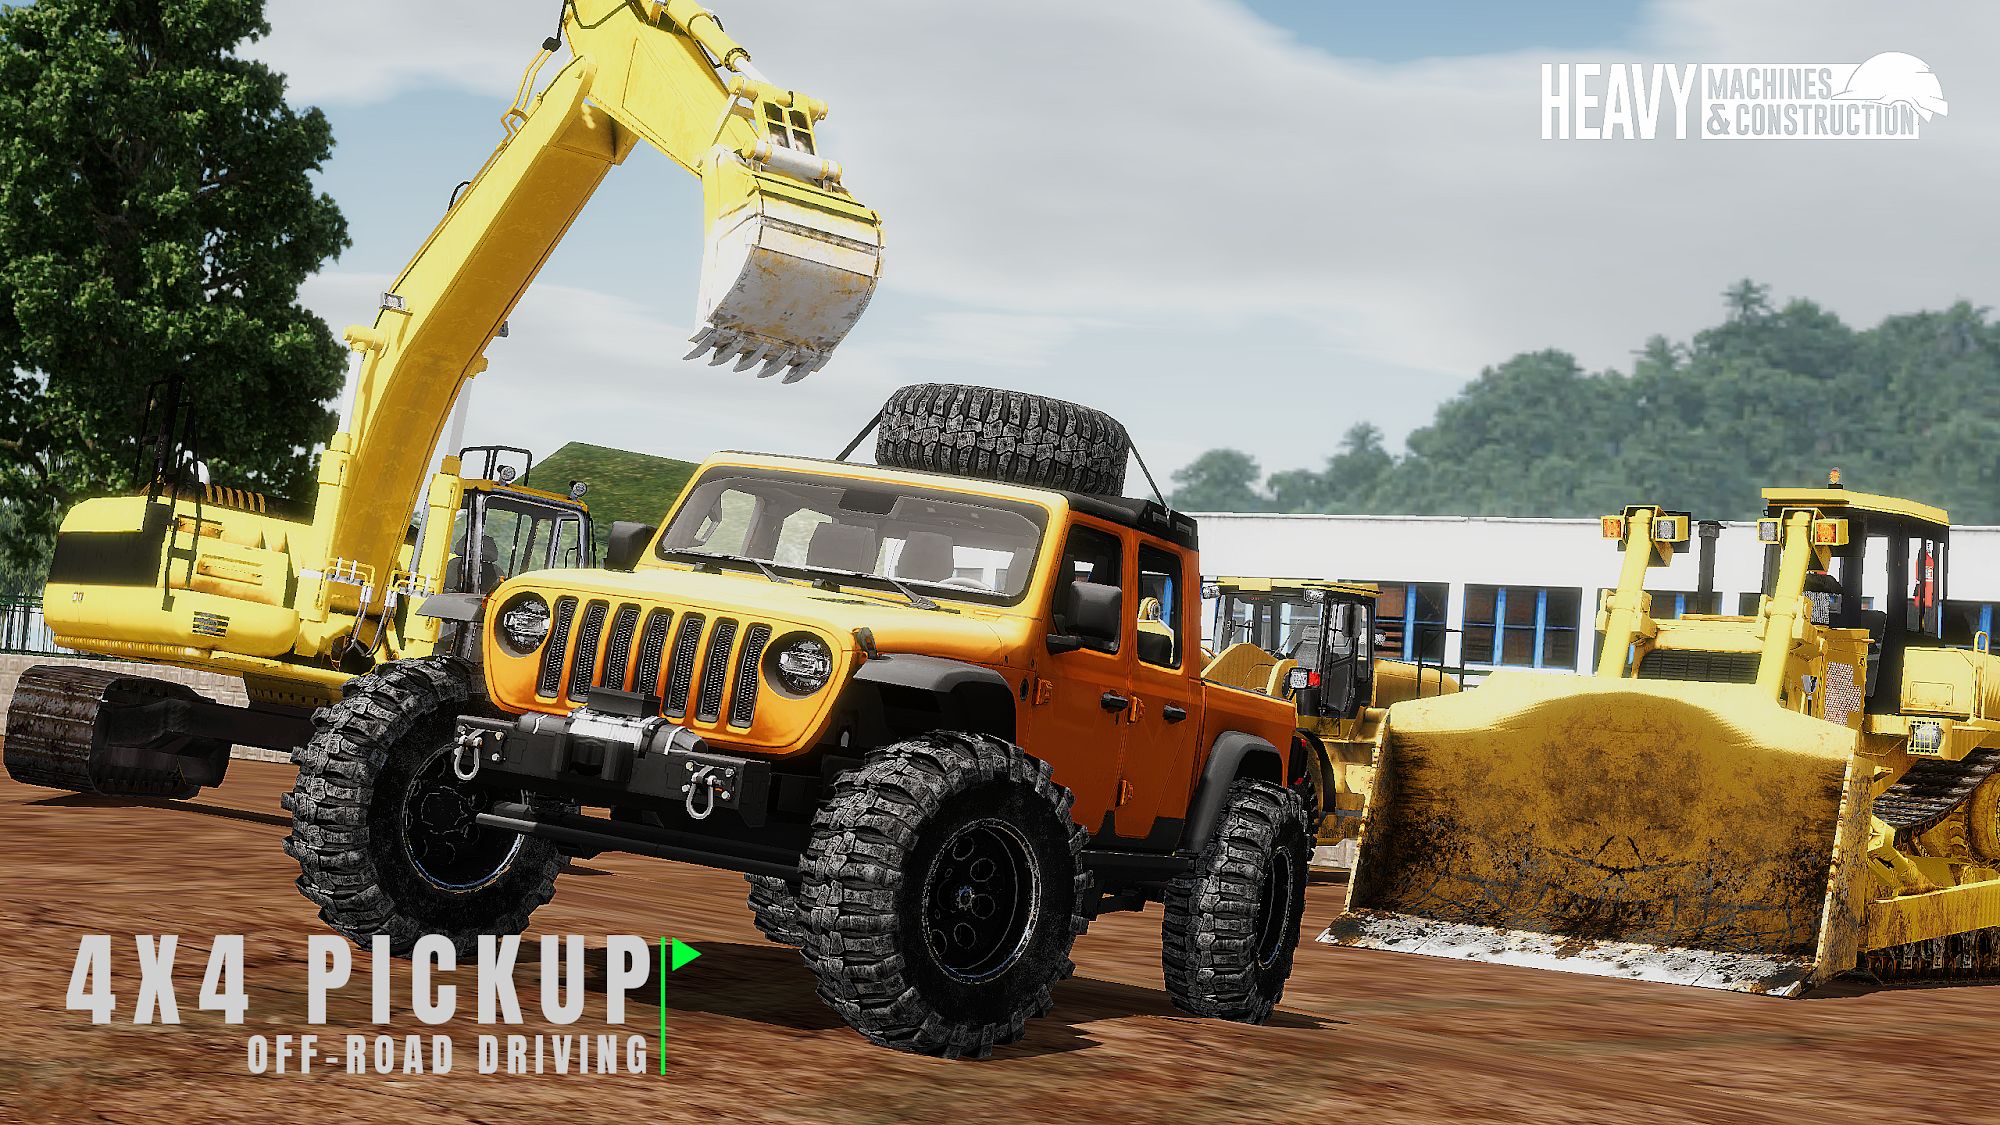 Full version of Android Open world game apk Heavy Machines & Construction for tablet and phone.